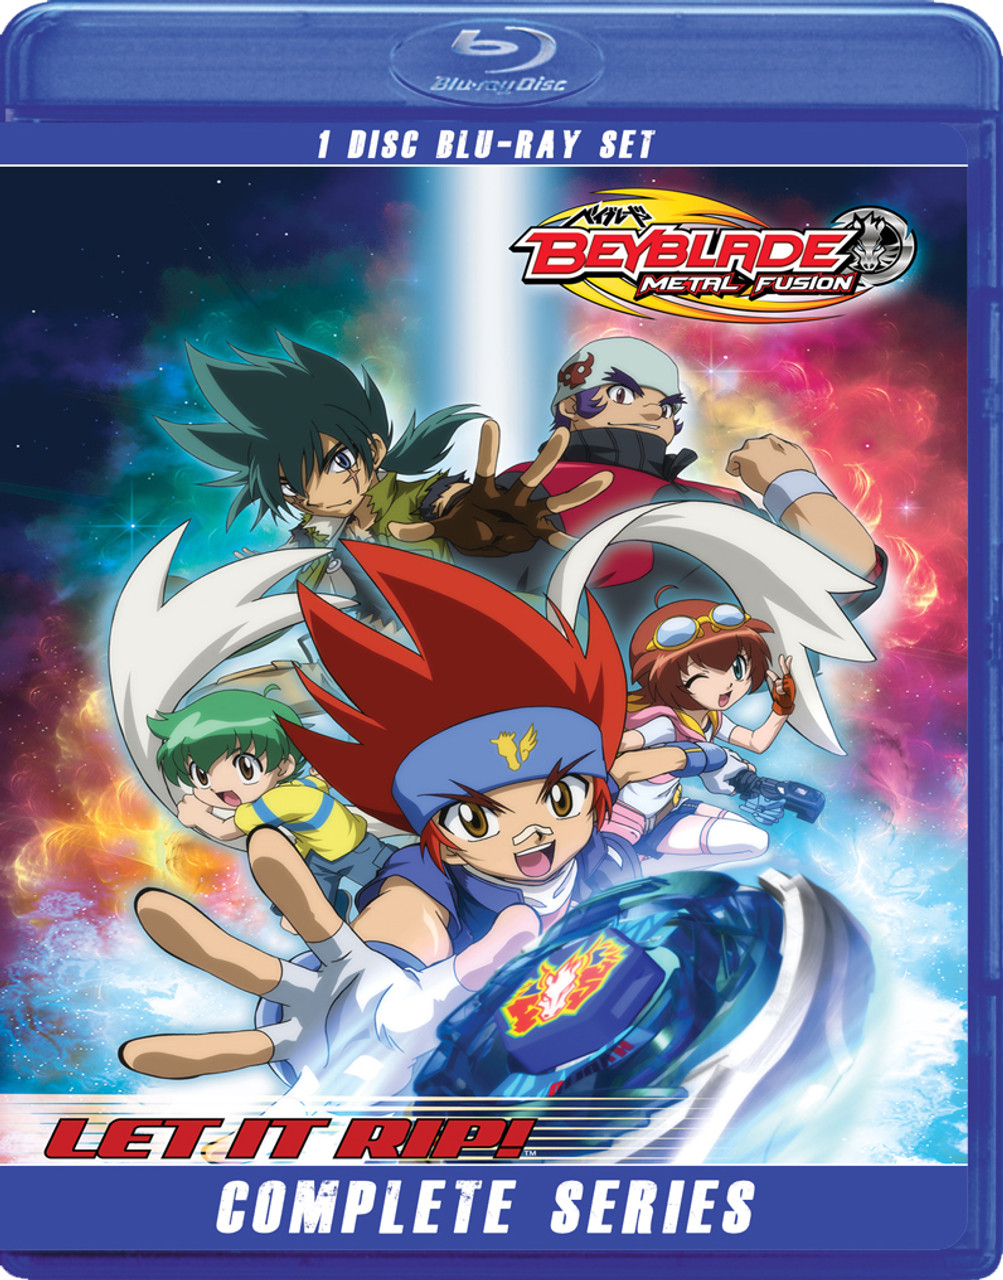 Disques volants - Beyblade Metal Fusion : flying discs + shooter